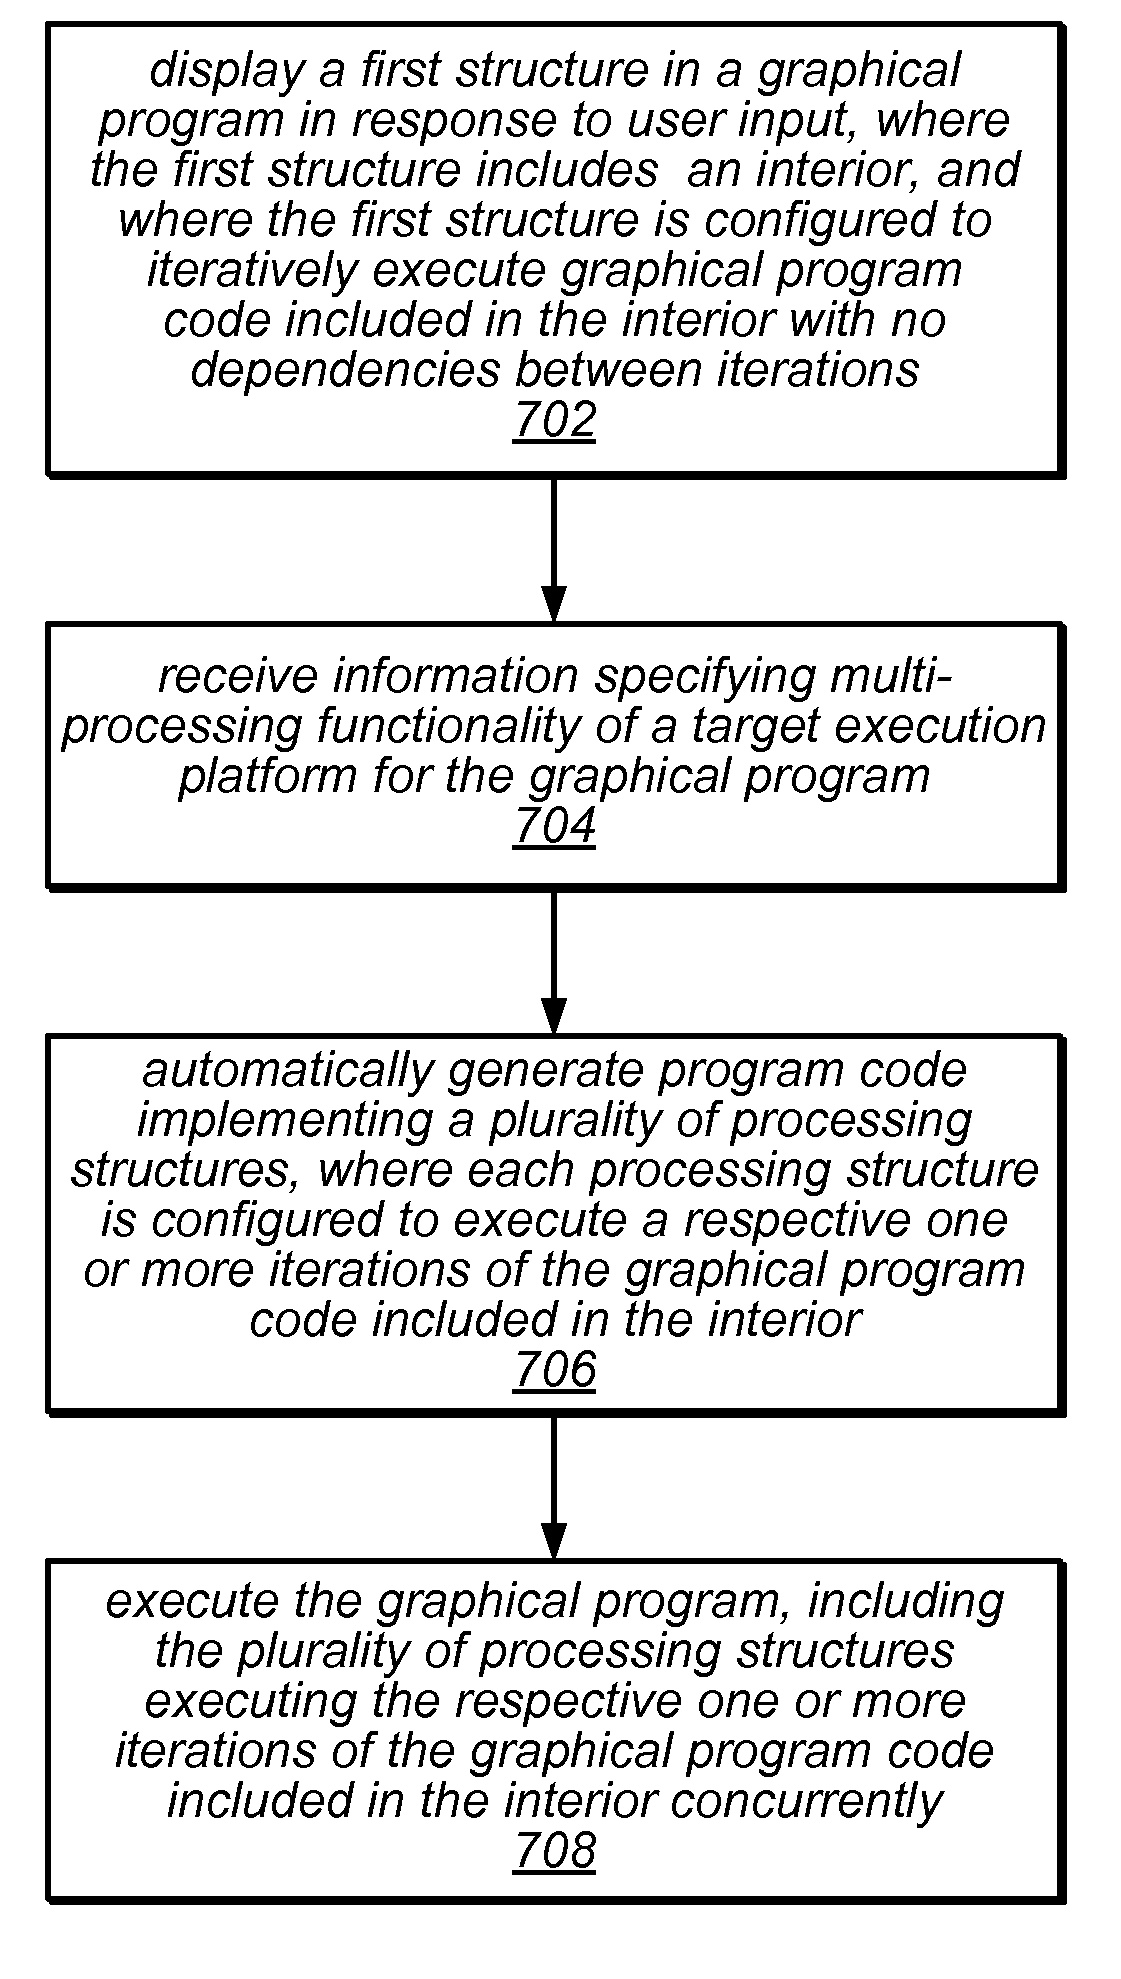 Automatically creating parallel iterative program code in a graphical data flow program